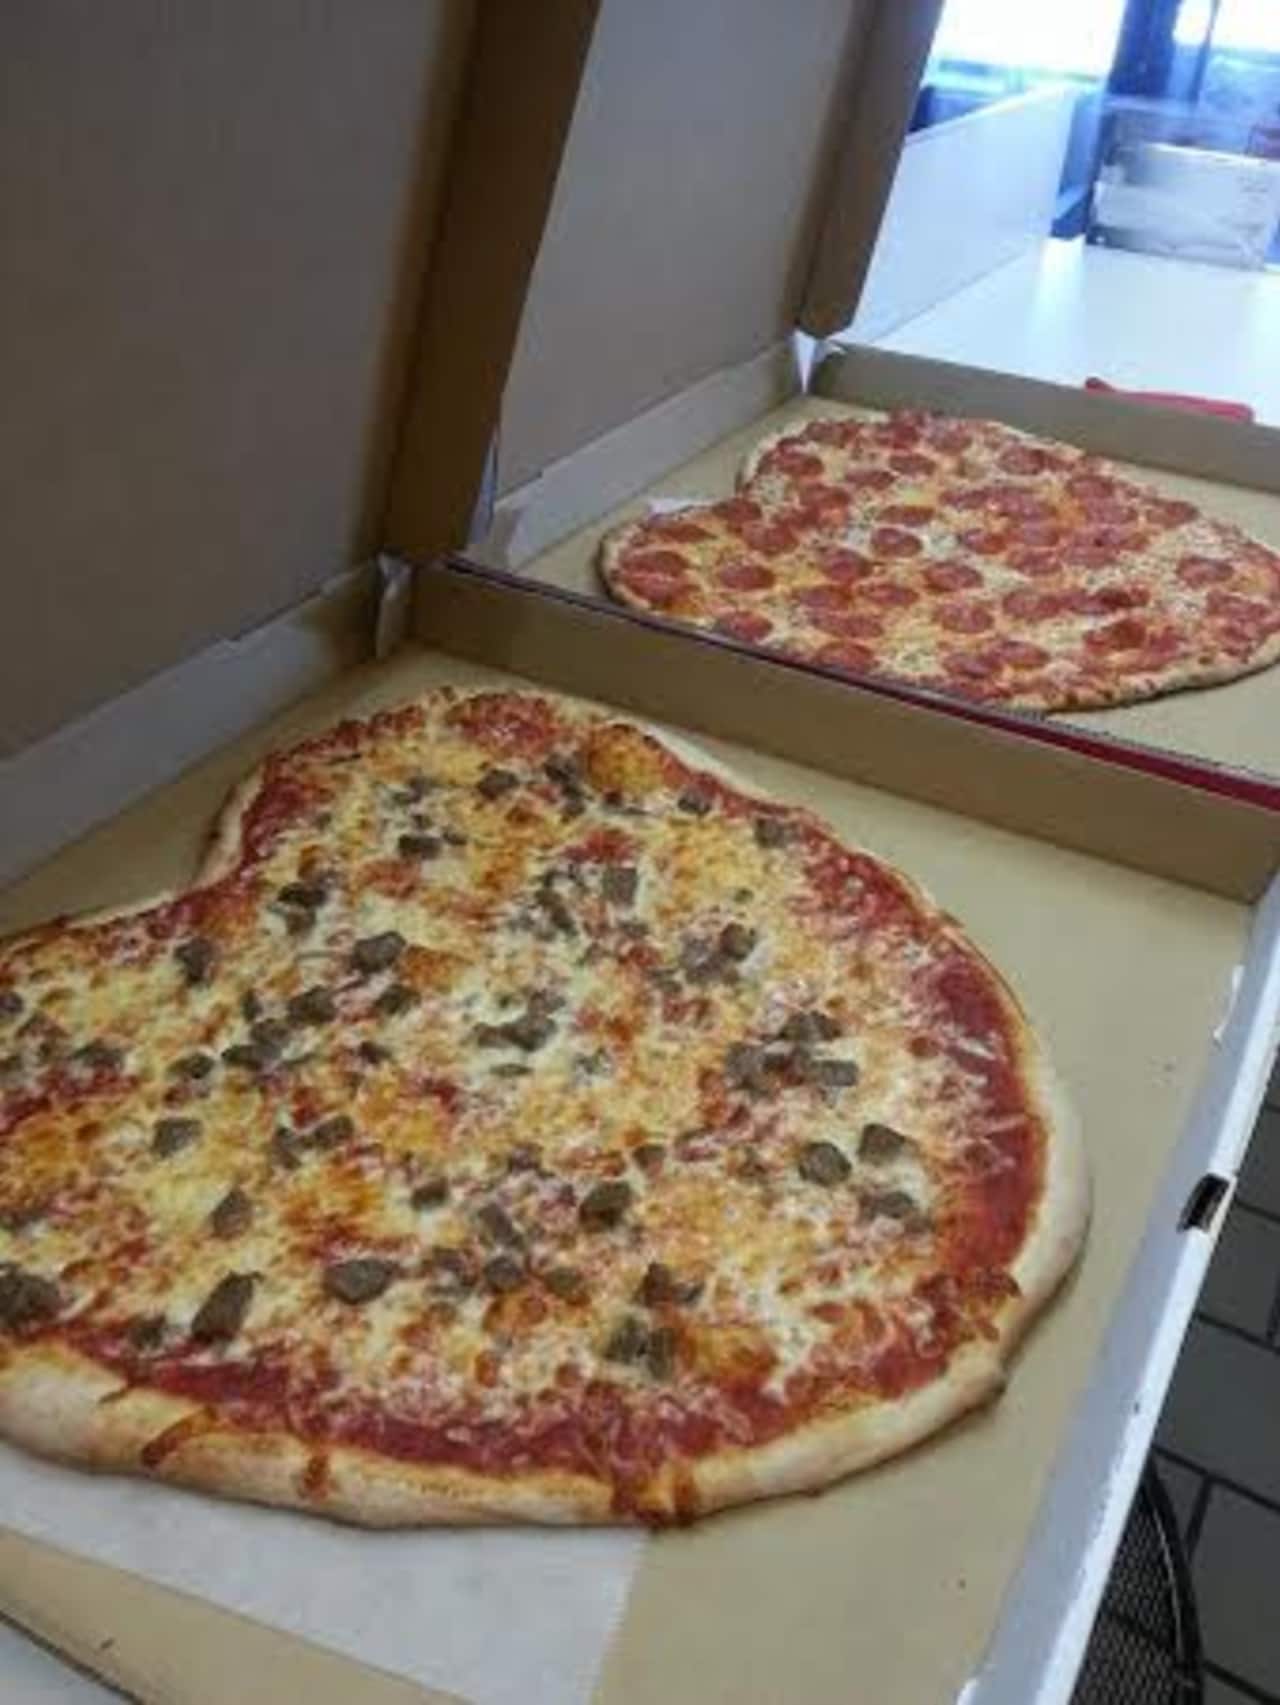 Joe's Pizza in New Canaan served heart-shaped pizzas on Valentine's Day.